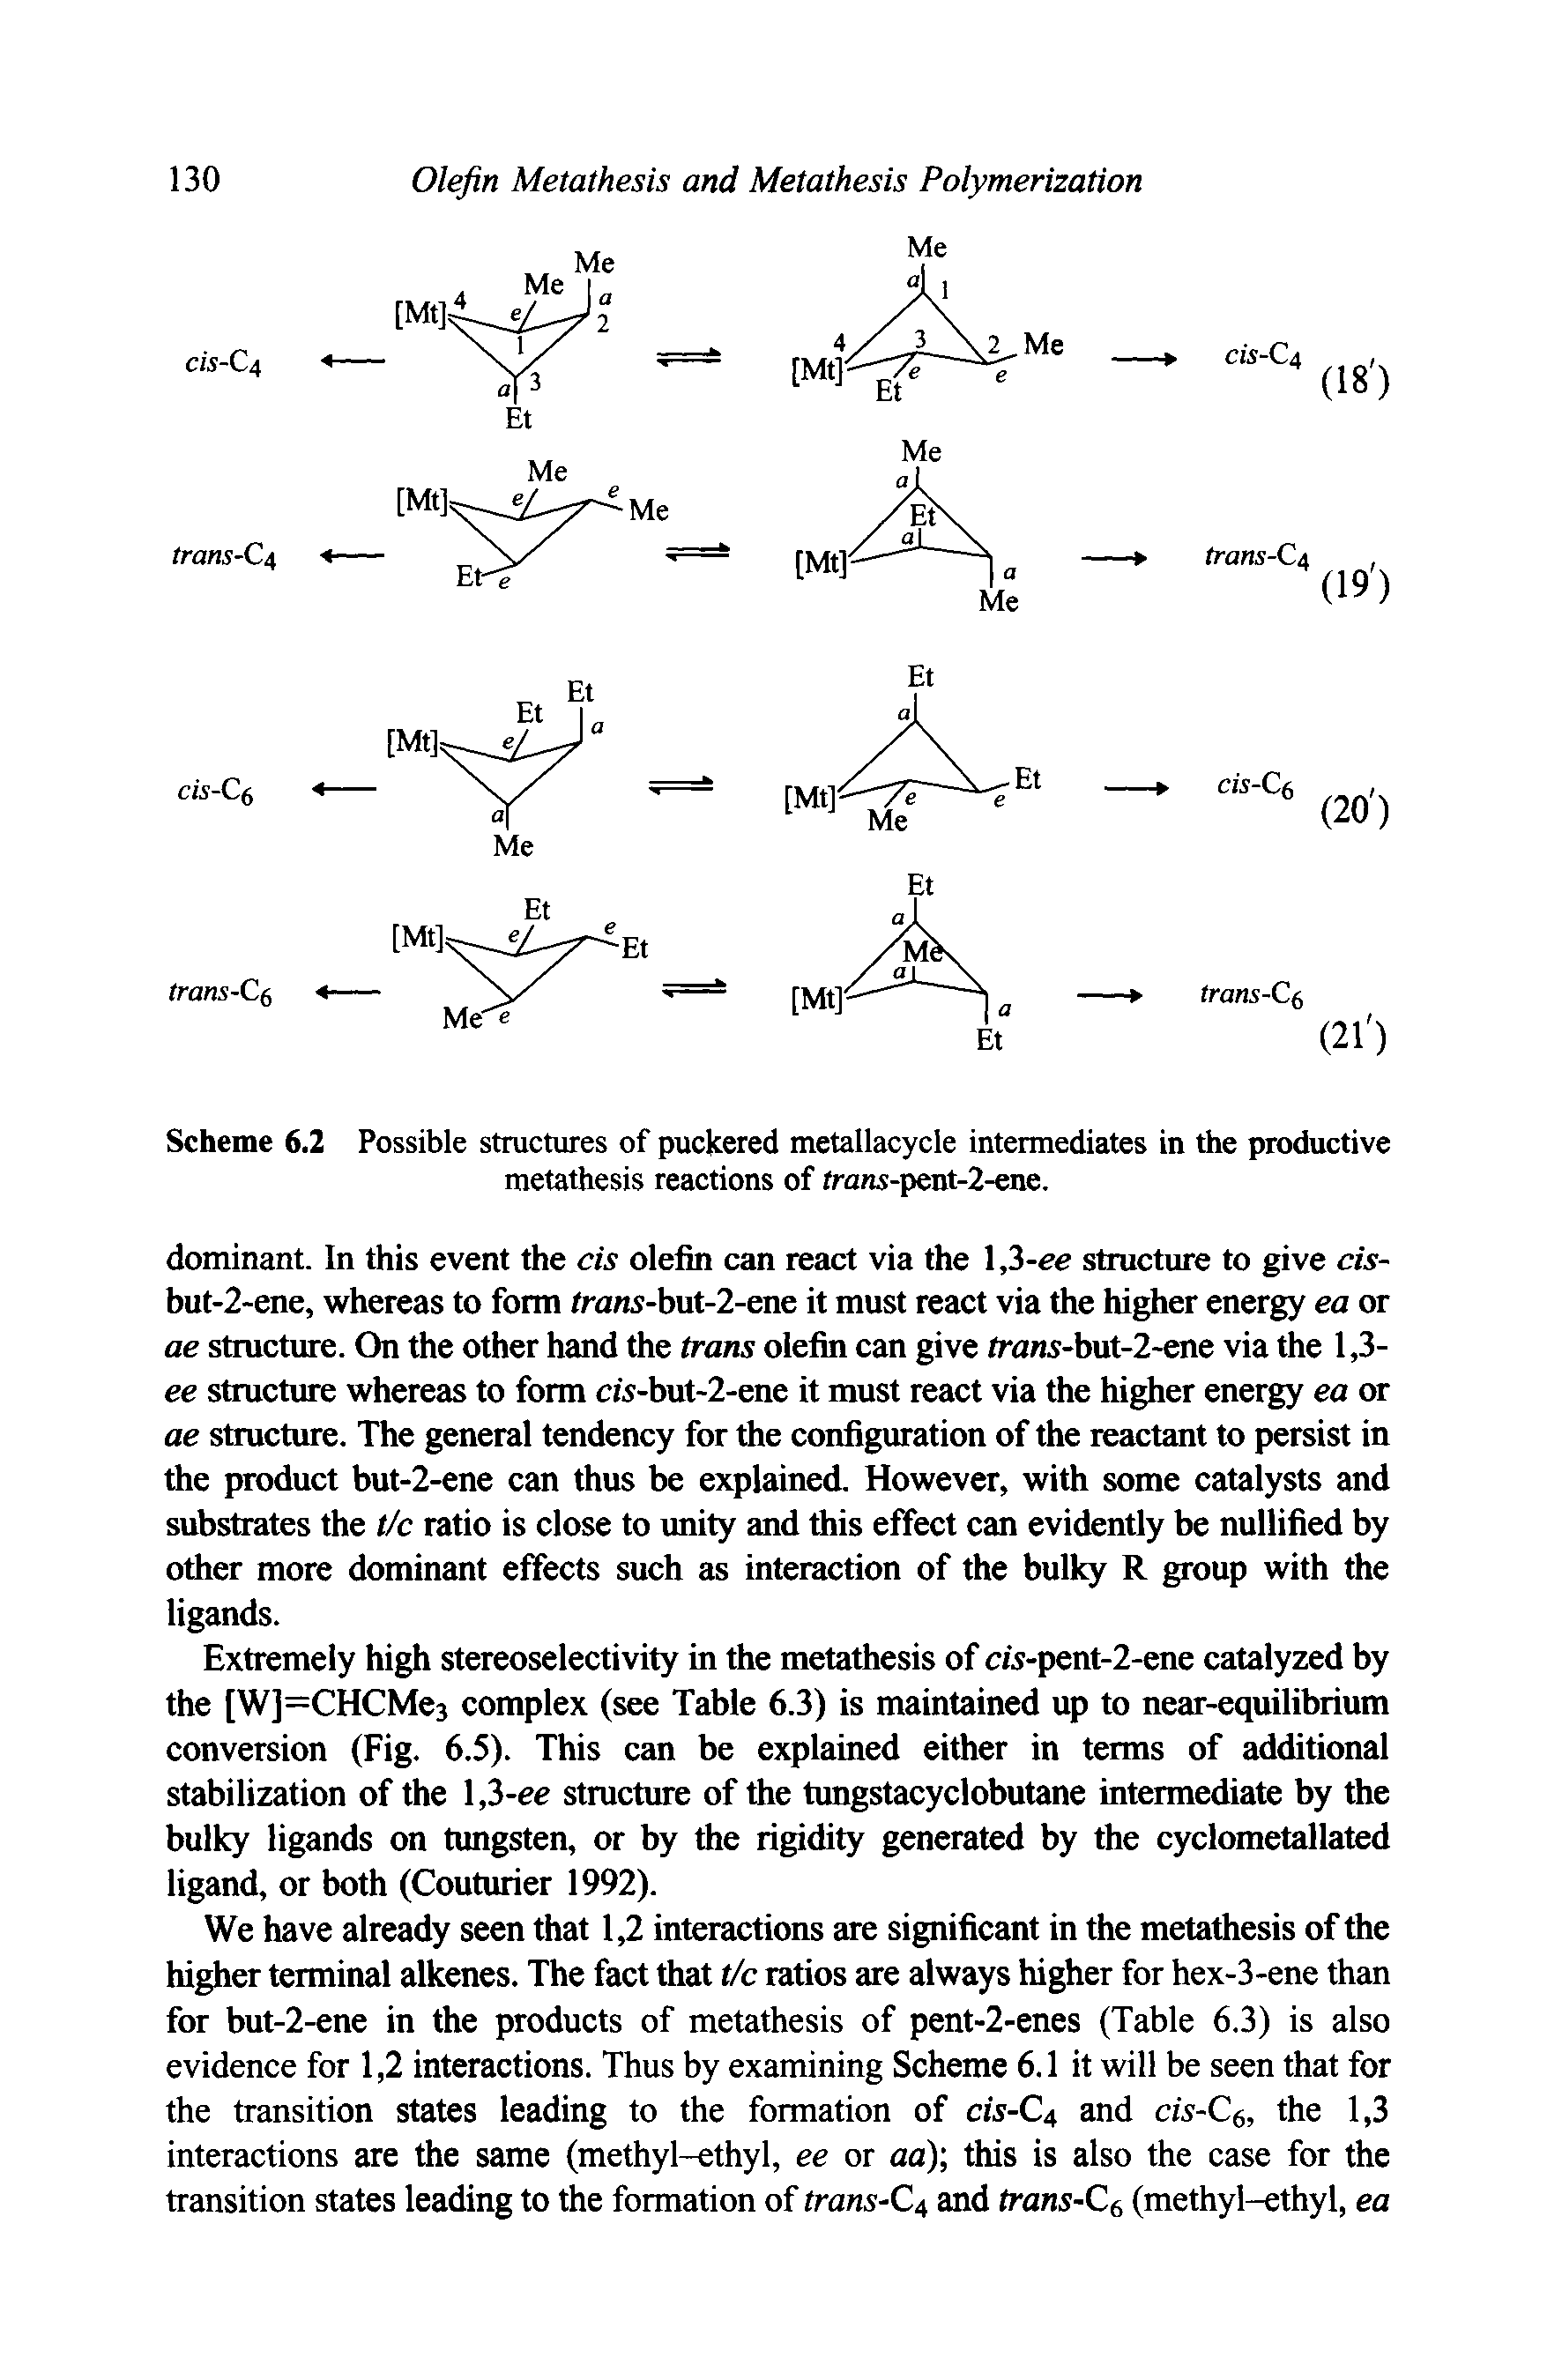 Scheme 6.2 Possible structures of puckered metallacycle intermediates in the productive metathesis reactions of trans-pent-2-ene.